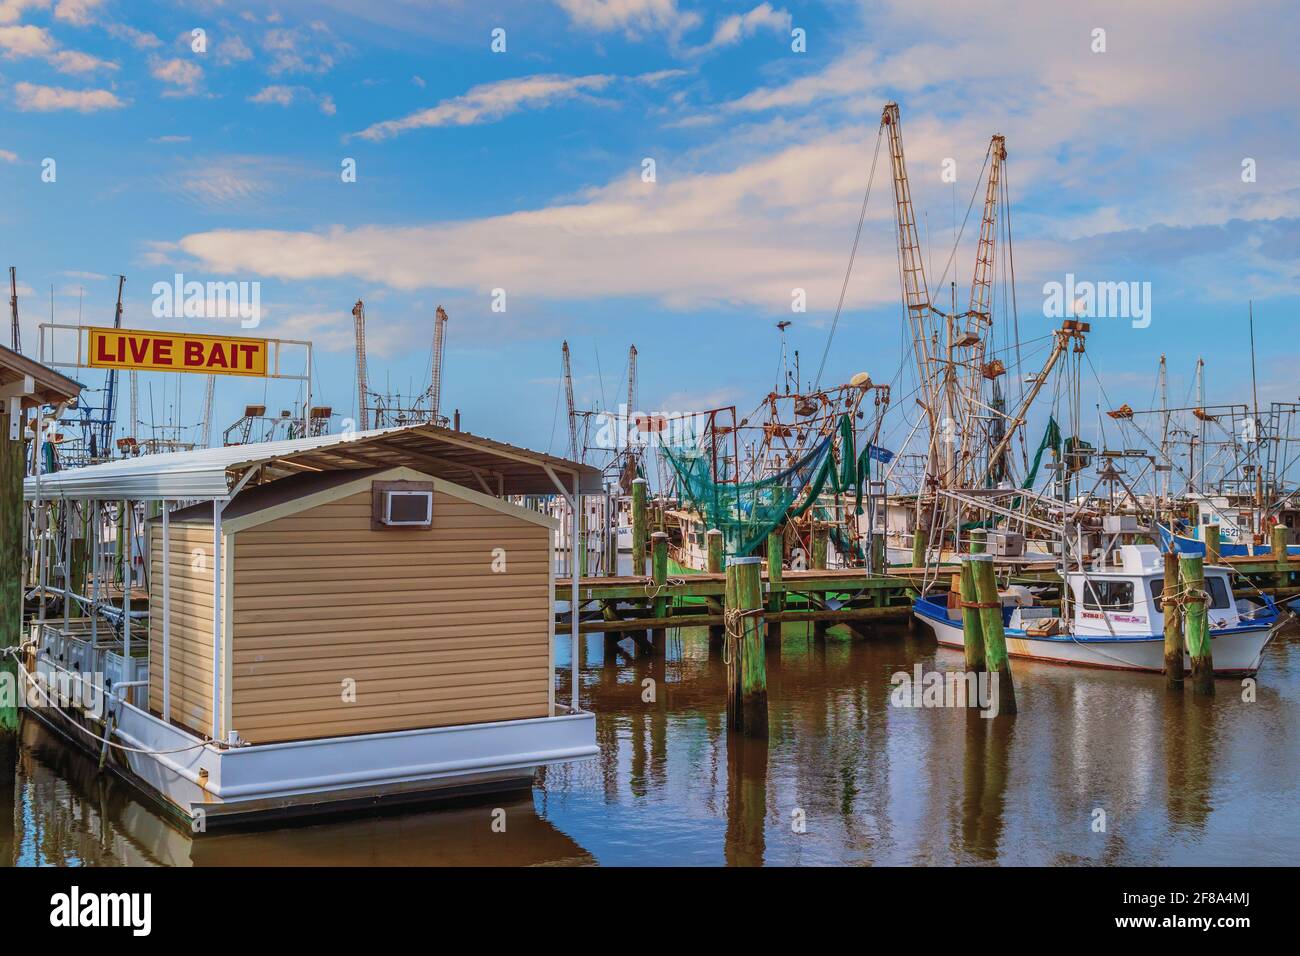 Shrimp Boats und Live Bait Shop in Pass Christian Harbour, Mississippi Gulf Coast, USA. Stockfoto